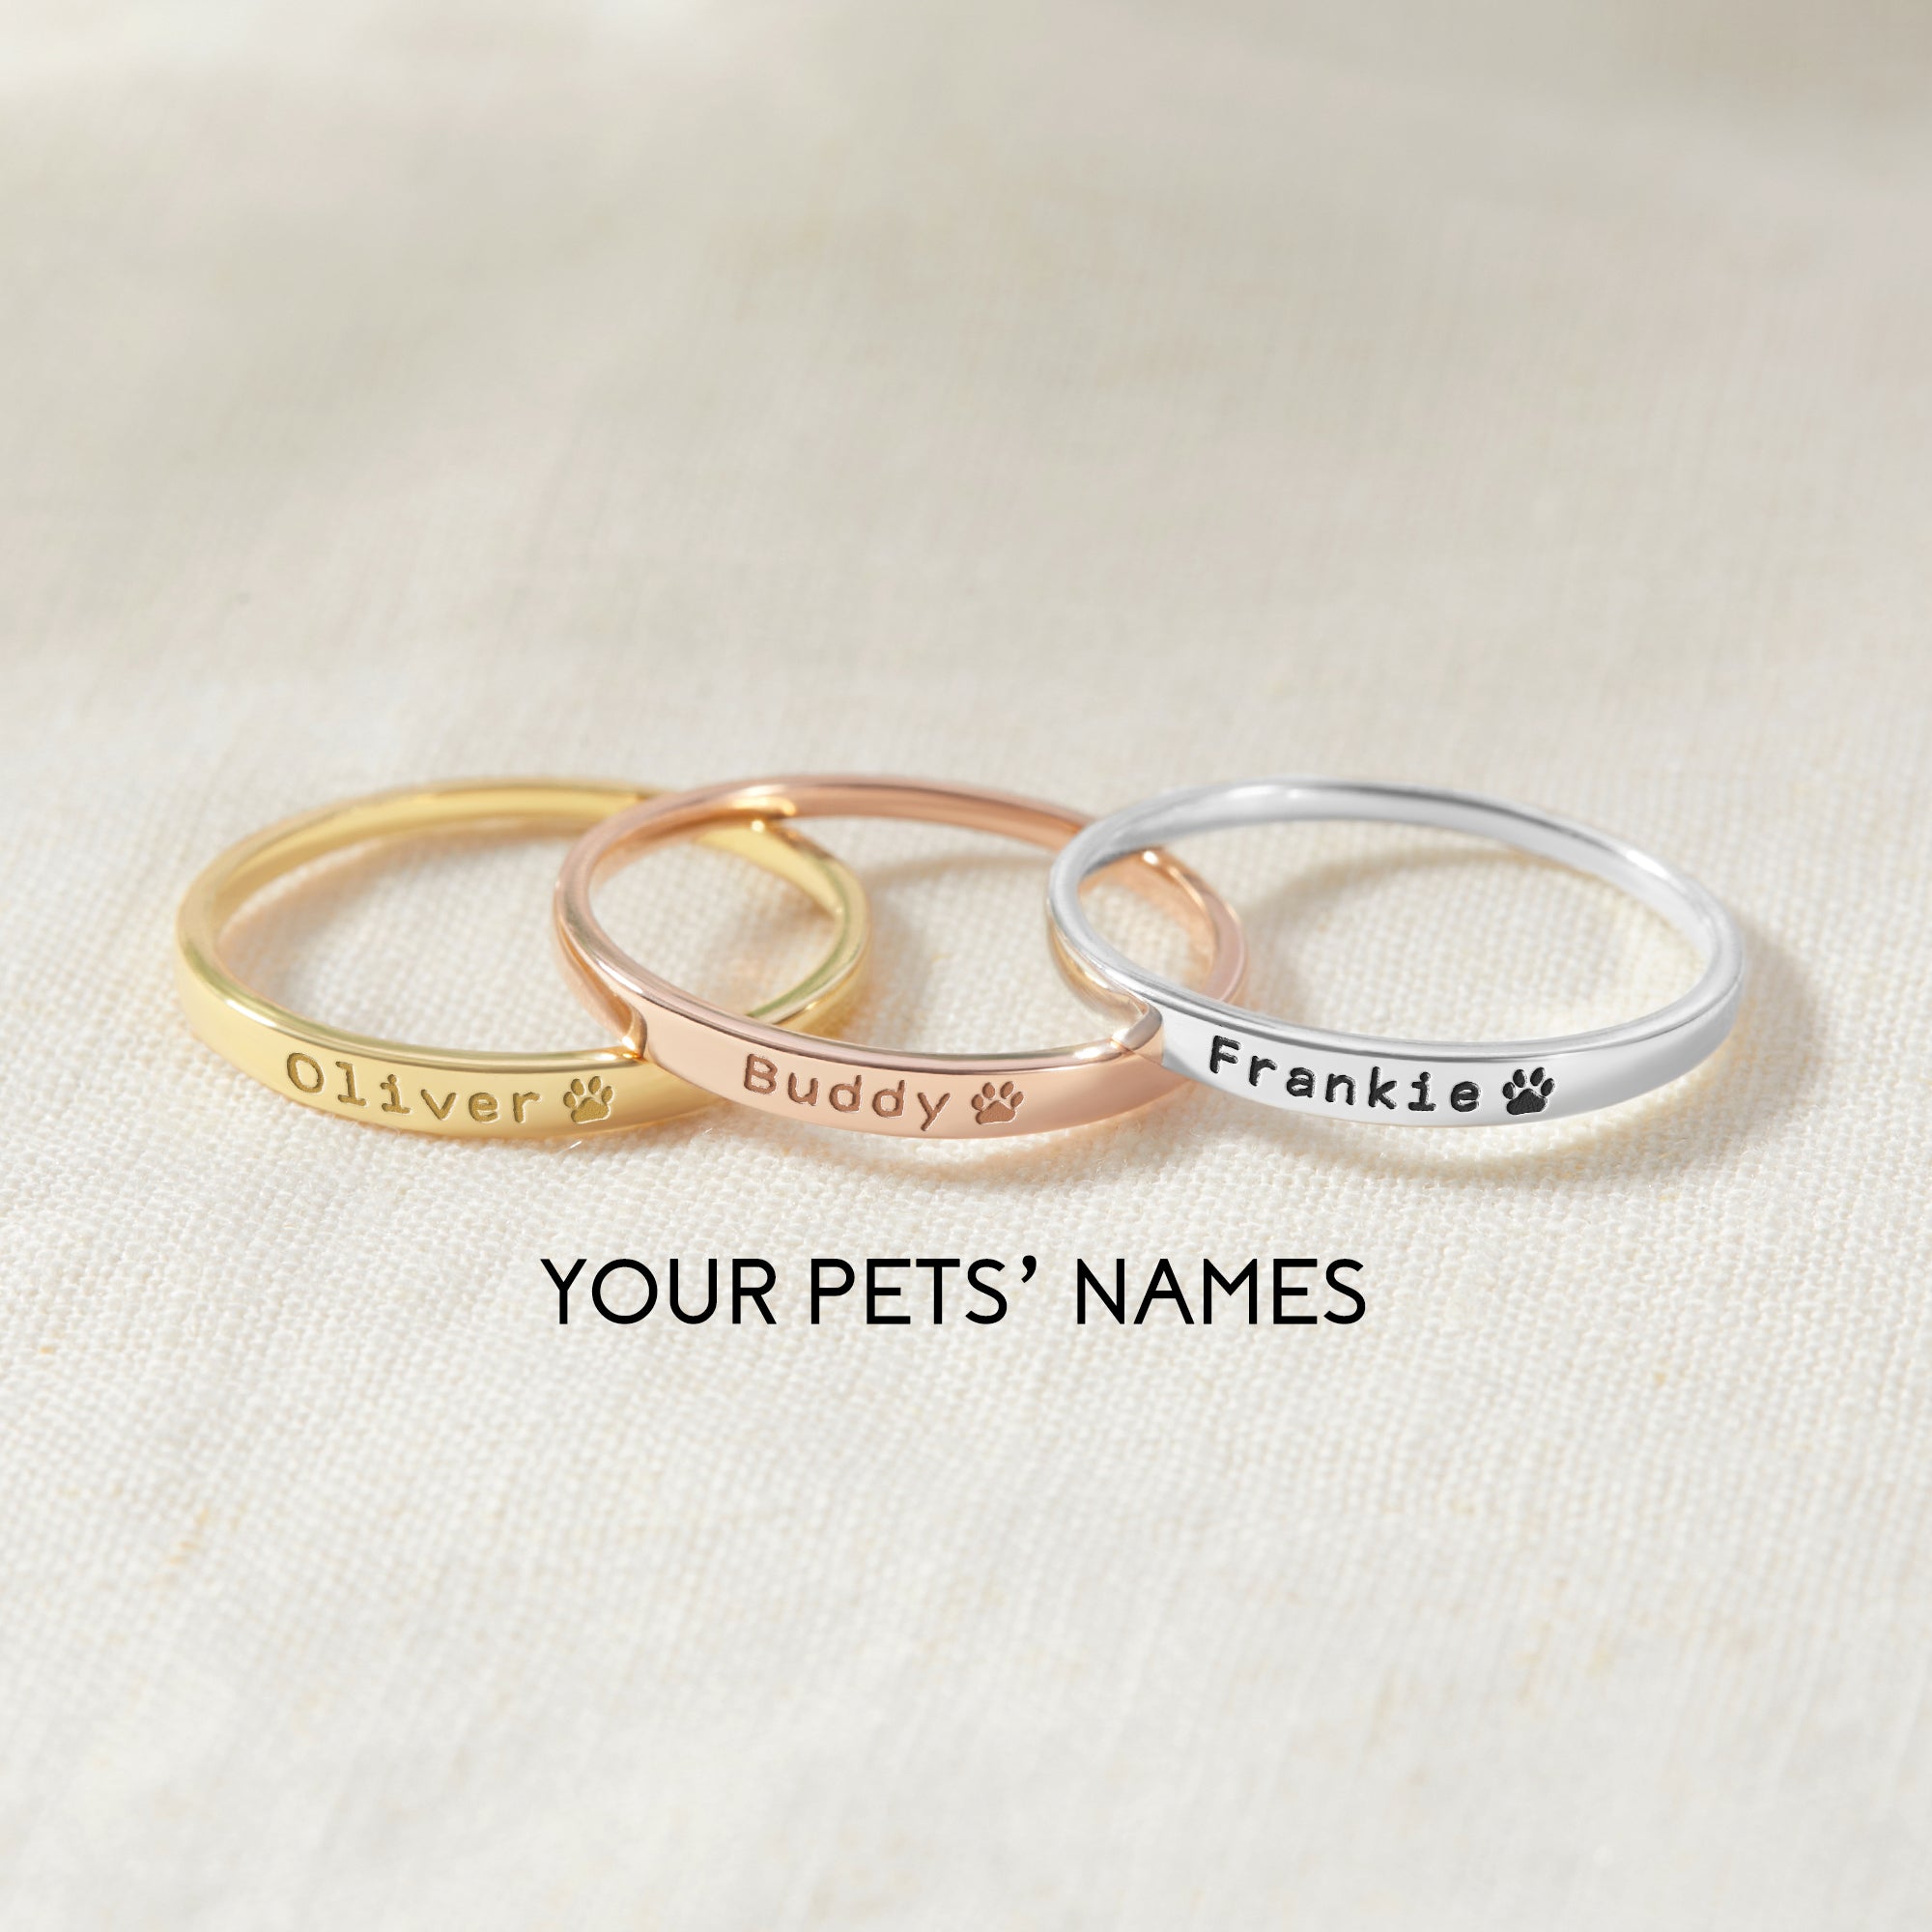 Personalized Pet Name Ring - Solid 925 Sterling Silver with 18K Gold, Rose Gold-Plated - Safe for Sensitive Skin - Unique Gift for Dog Lovers - 9 Character Limit - Comes in Gift Box - Rings - Bijou Her -  -  - 